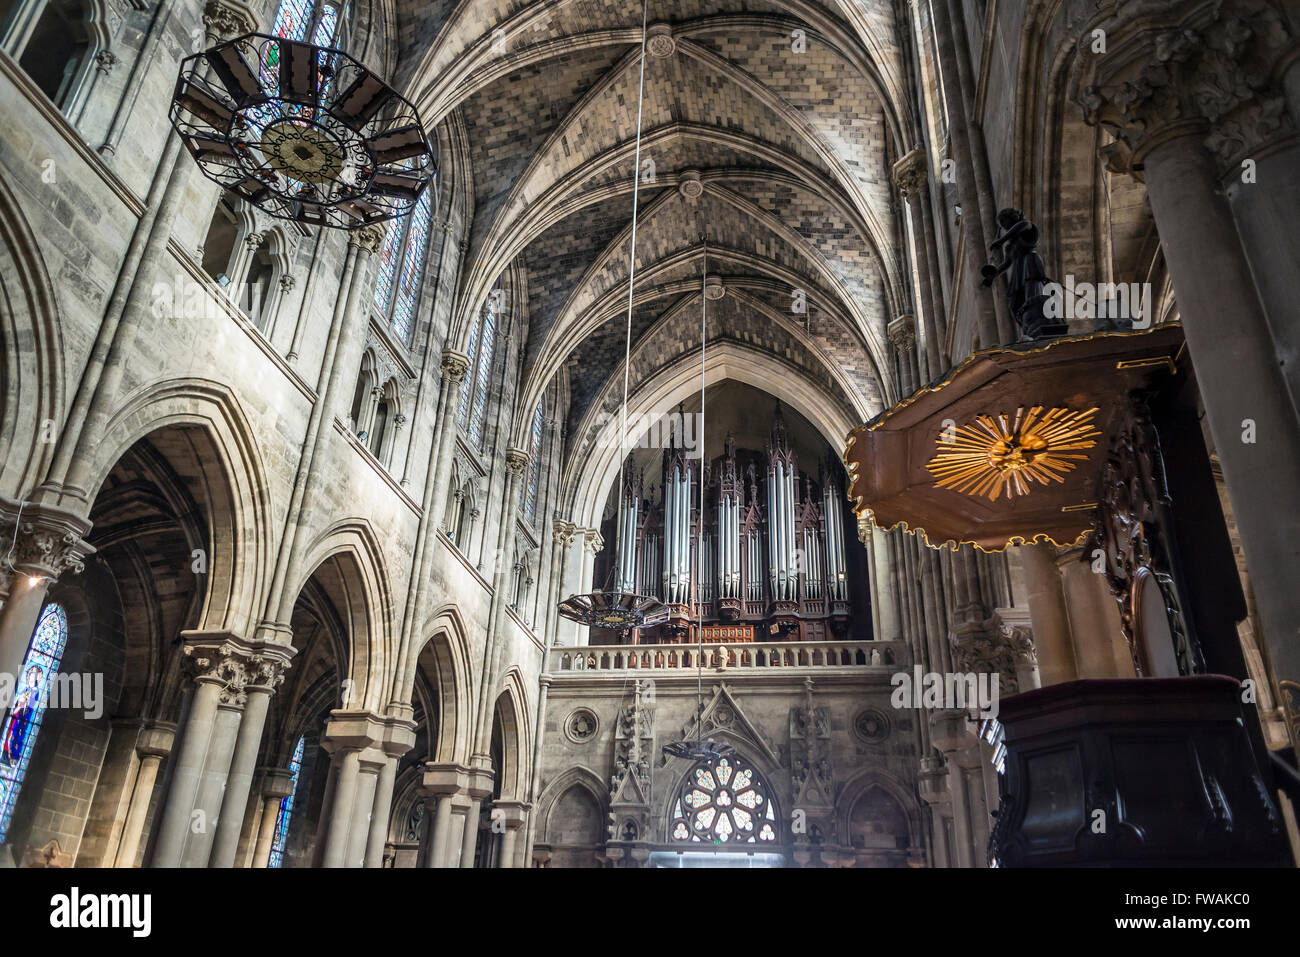 The pipe organ in nave of St Louis des Chartrons church. Bordeaux, Aquitaine, France. Stock Photo